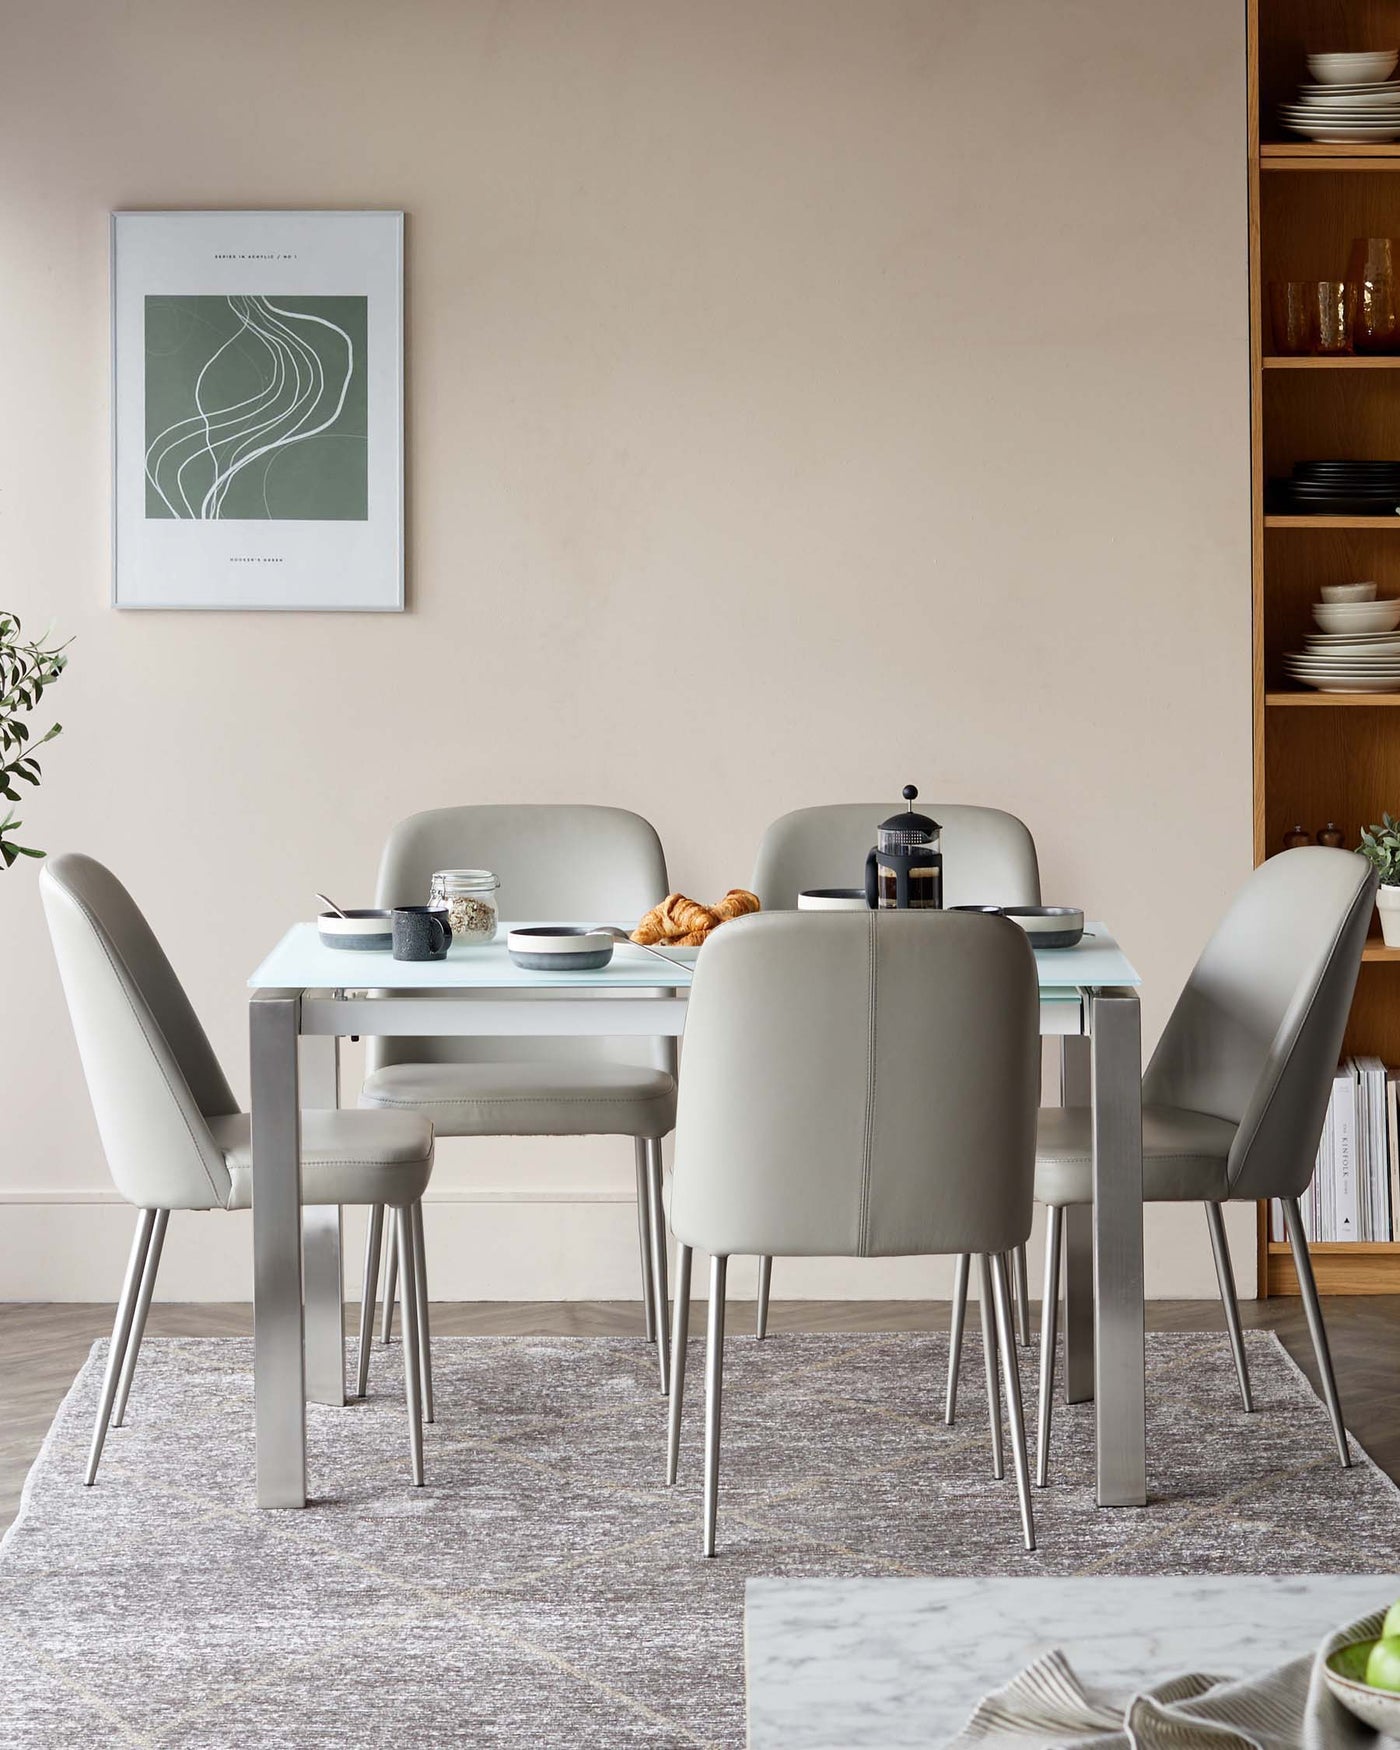 Modern minimalist dining set with a rectangular light grey tabletop and sleek stainless steel legs, surrounded by four upholstered chairs in matching tone with curved backs and slim metallic legs, arranged on a textured grey area rug. A wooden open shelf cabinet with various dishes is partially visible in the background.